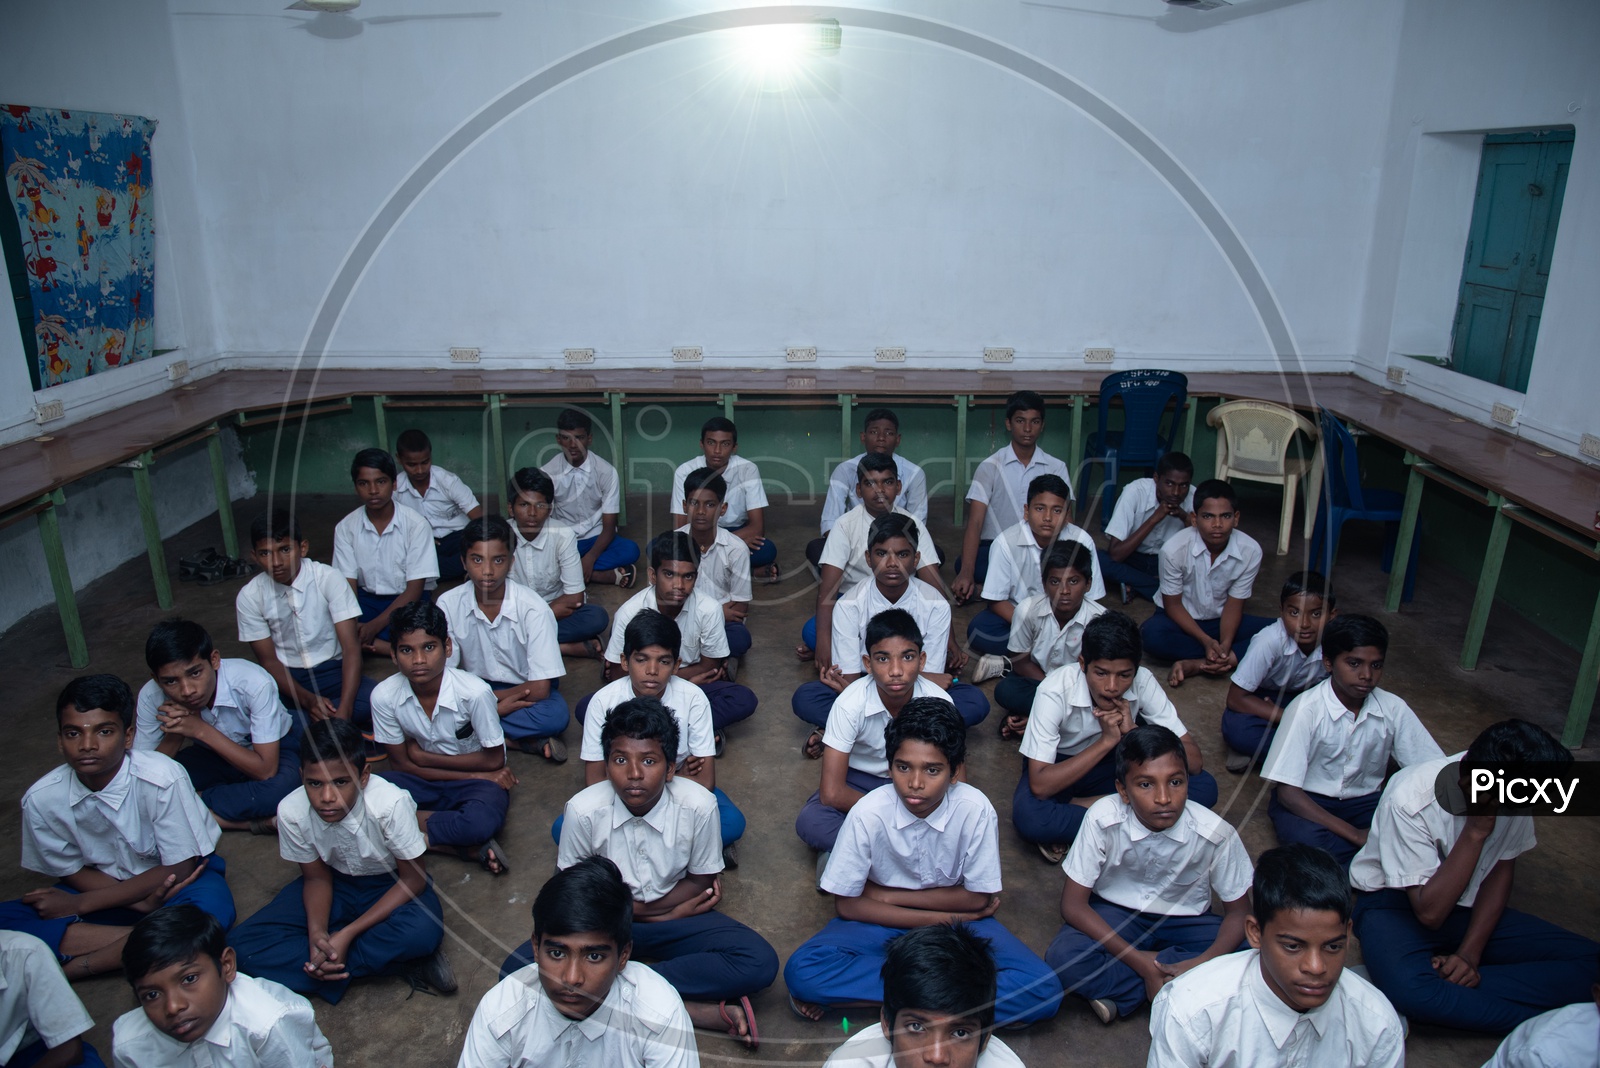 Students in a classroom